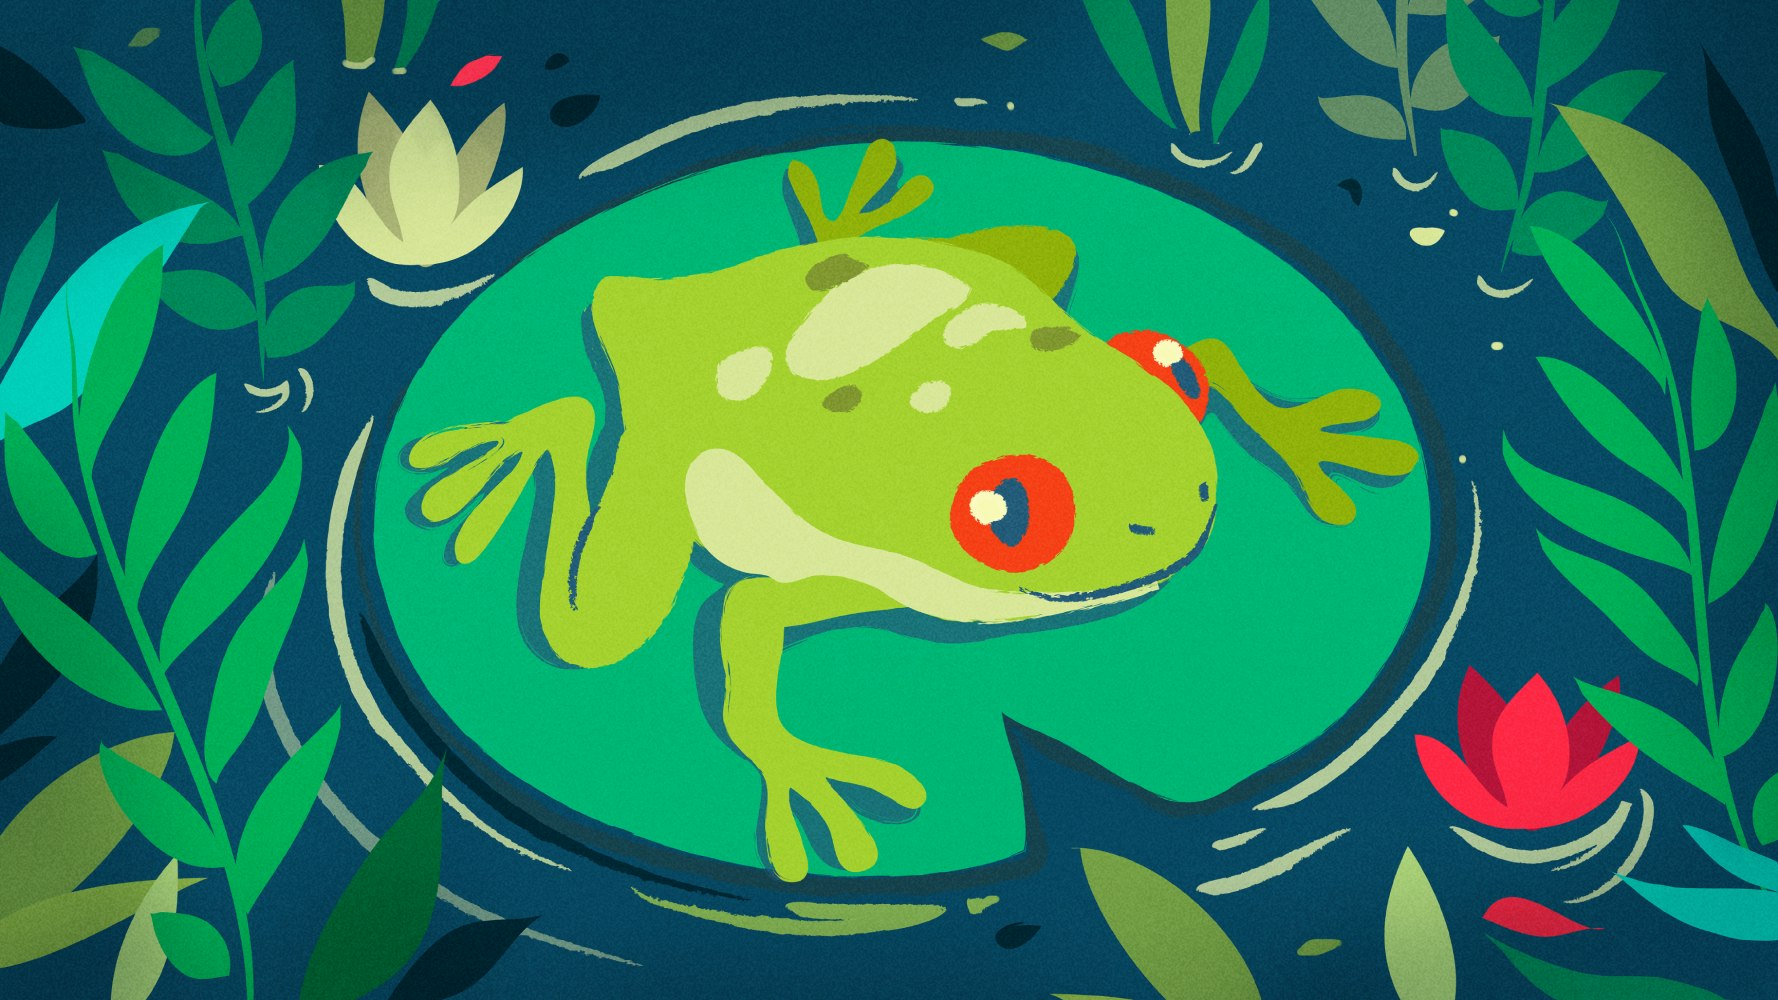 lily pad and frog template